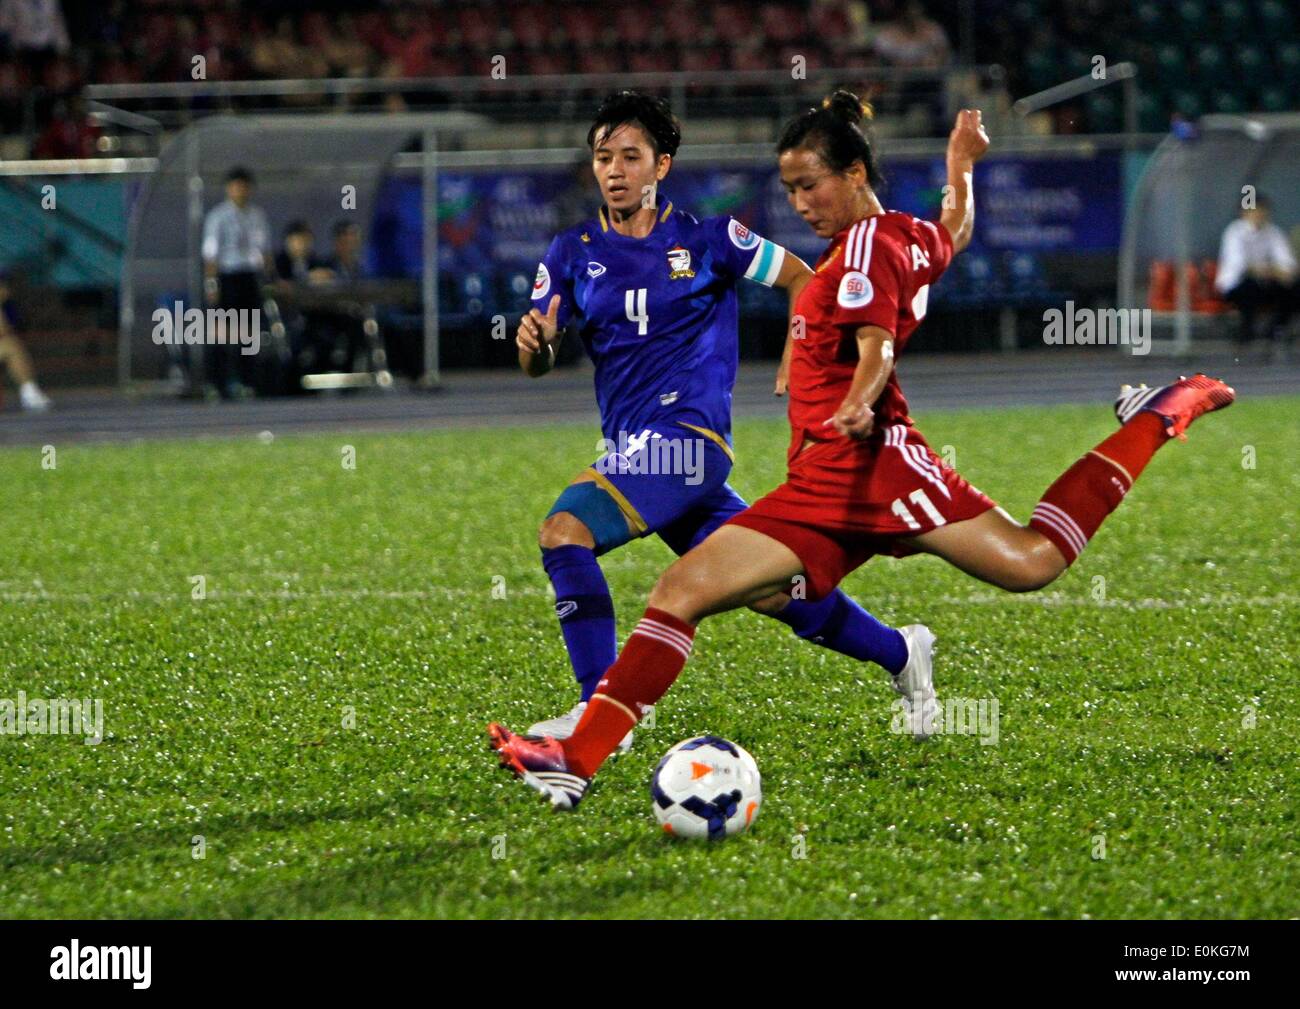 Ho Chi Minh City, Vietnam. 15th May, 2014. Yang Li (R) of China shoots during the 2014 AFC Women's Asian Cup against Thailand at Thong Nhat Stadium in Ho Chi Minh city, Vietnam, May 15, 2014. China beat Thailand 7-0 © Nguyen Le Huyen/Xinhua/Alamy Live News Stock Photo